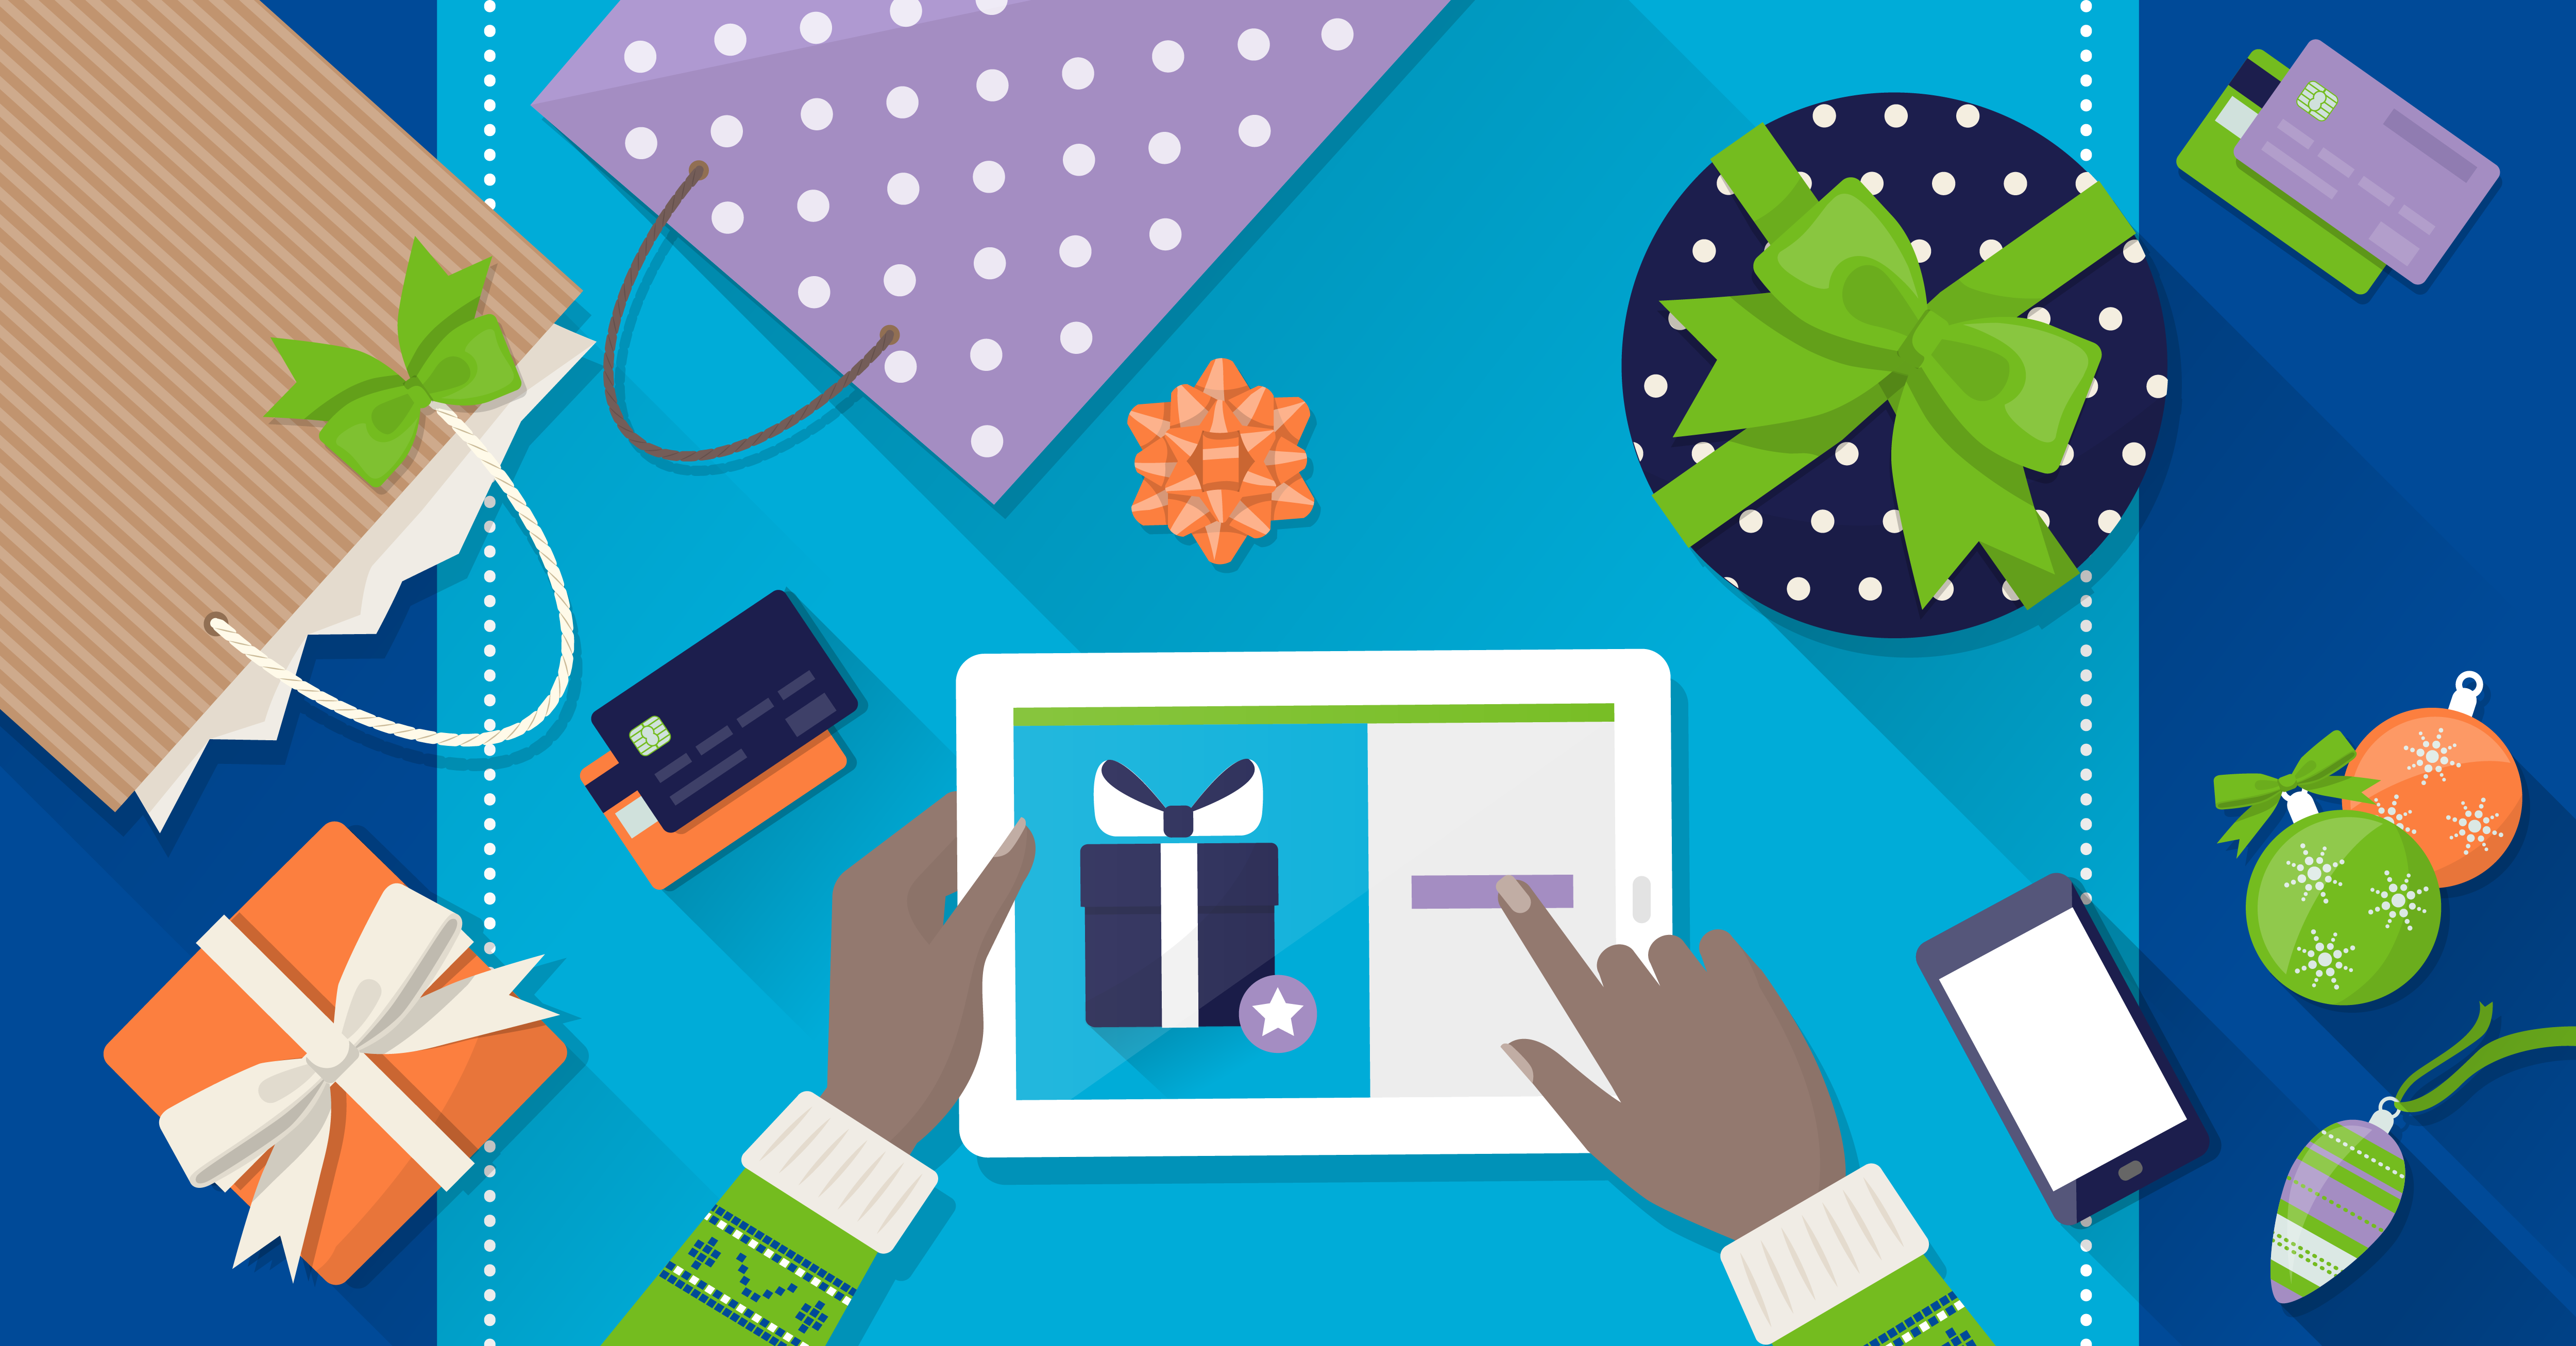 Here Come the Holidays | 6 Marketing Ideas for Small Businesses